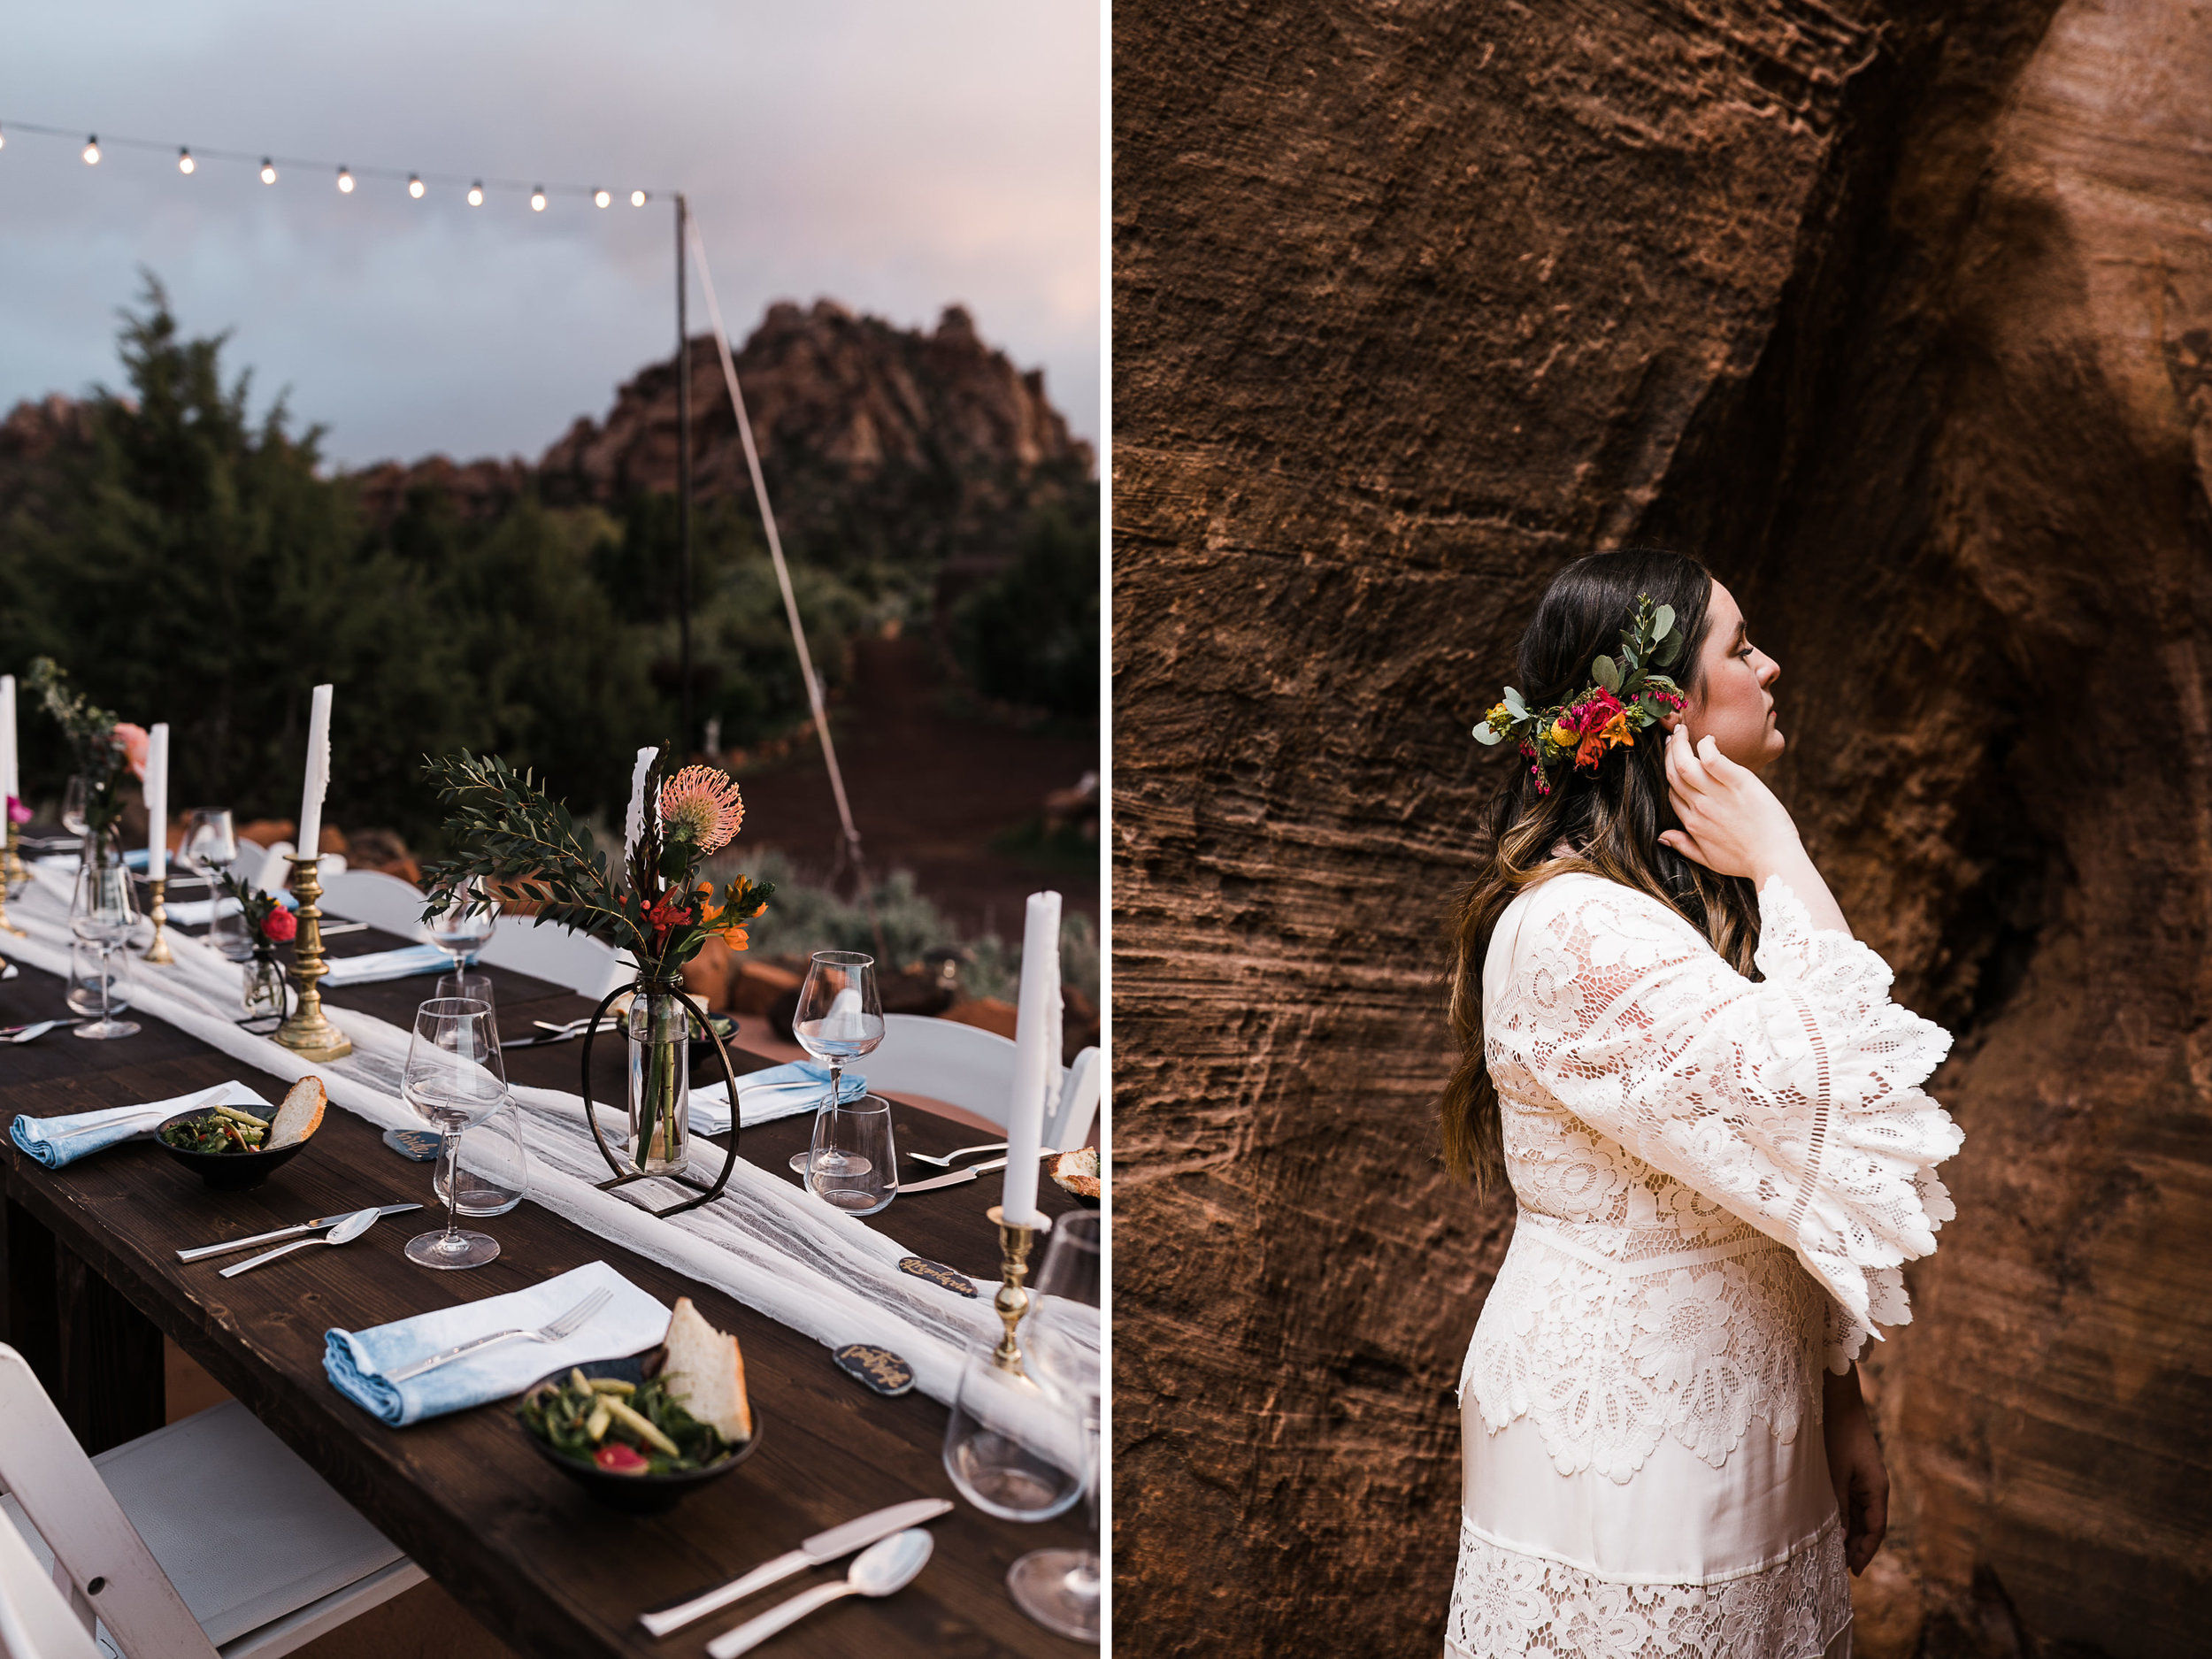 styled elopement dinner ideas | sunset intimate wedding in the desert | the hearnes adventure photography